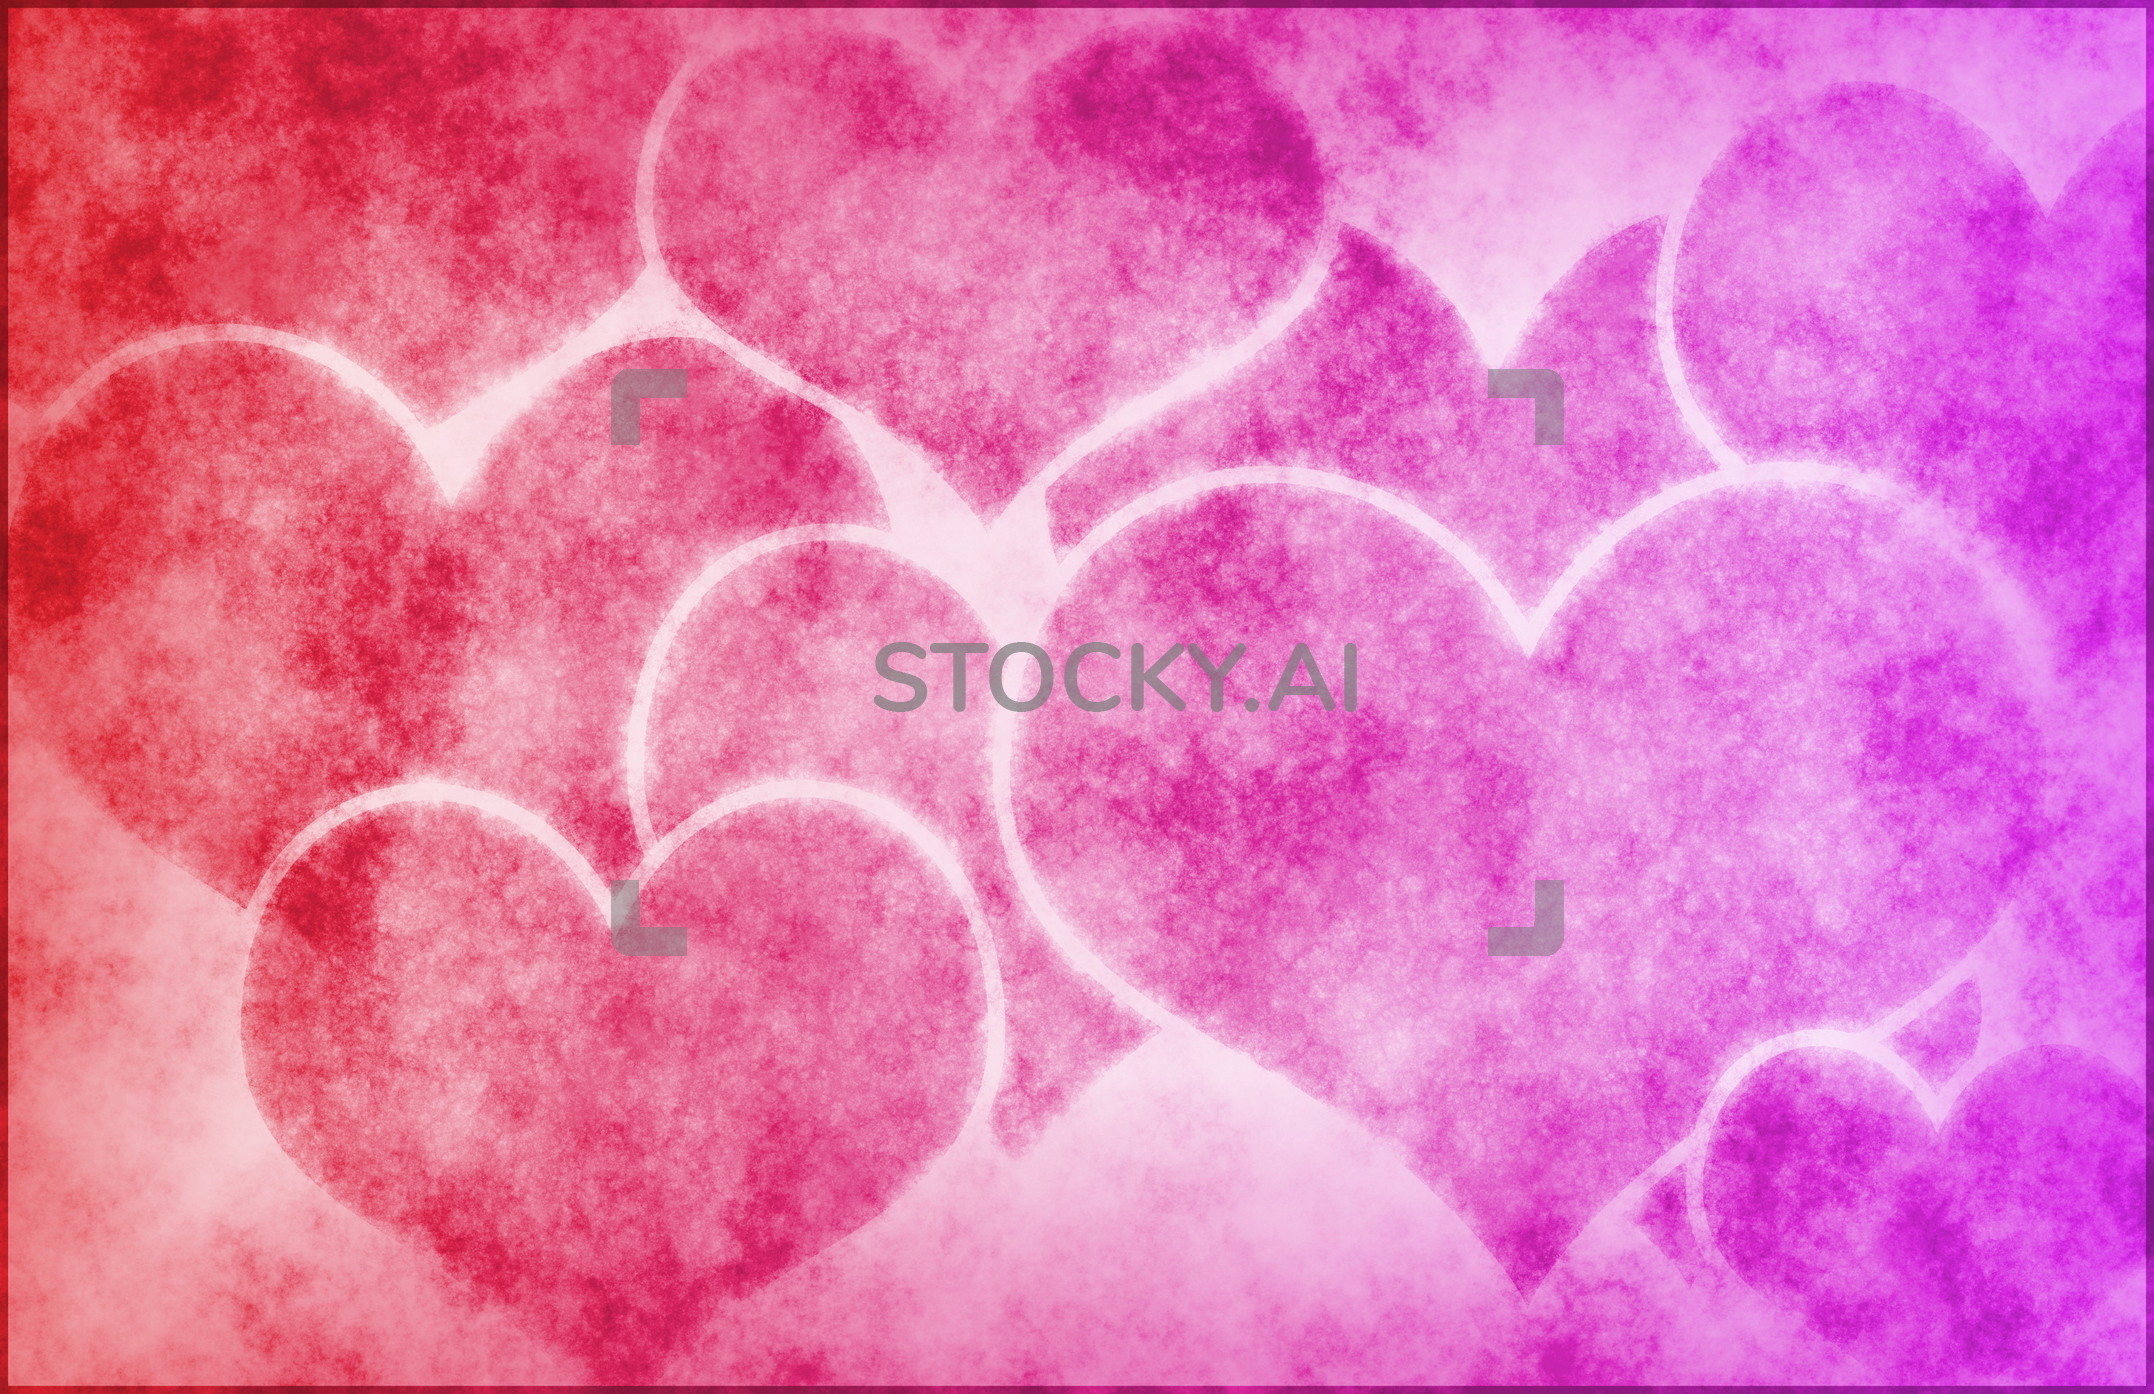 2154x1394 Image of Hearts Background